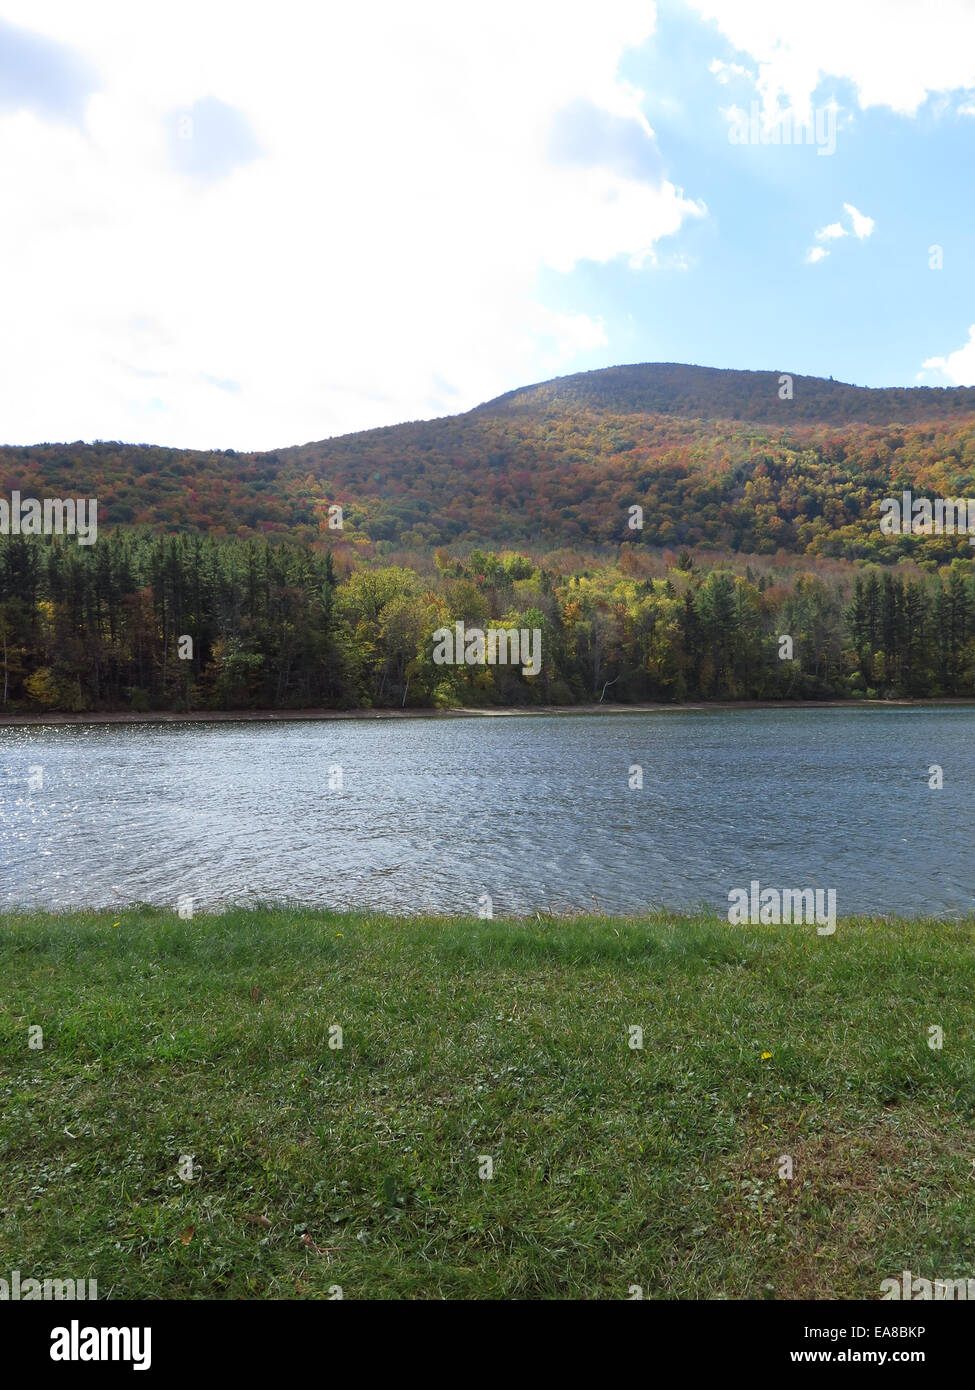 The public drinking water reservoir for the city of North Adams has a beautiful view of Mount Greylock in the fall. Stock Photo